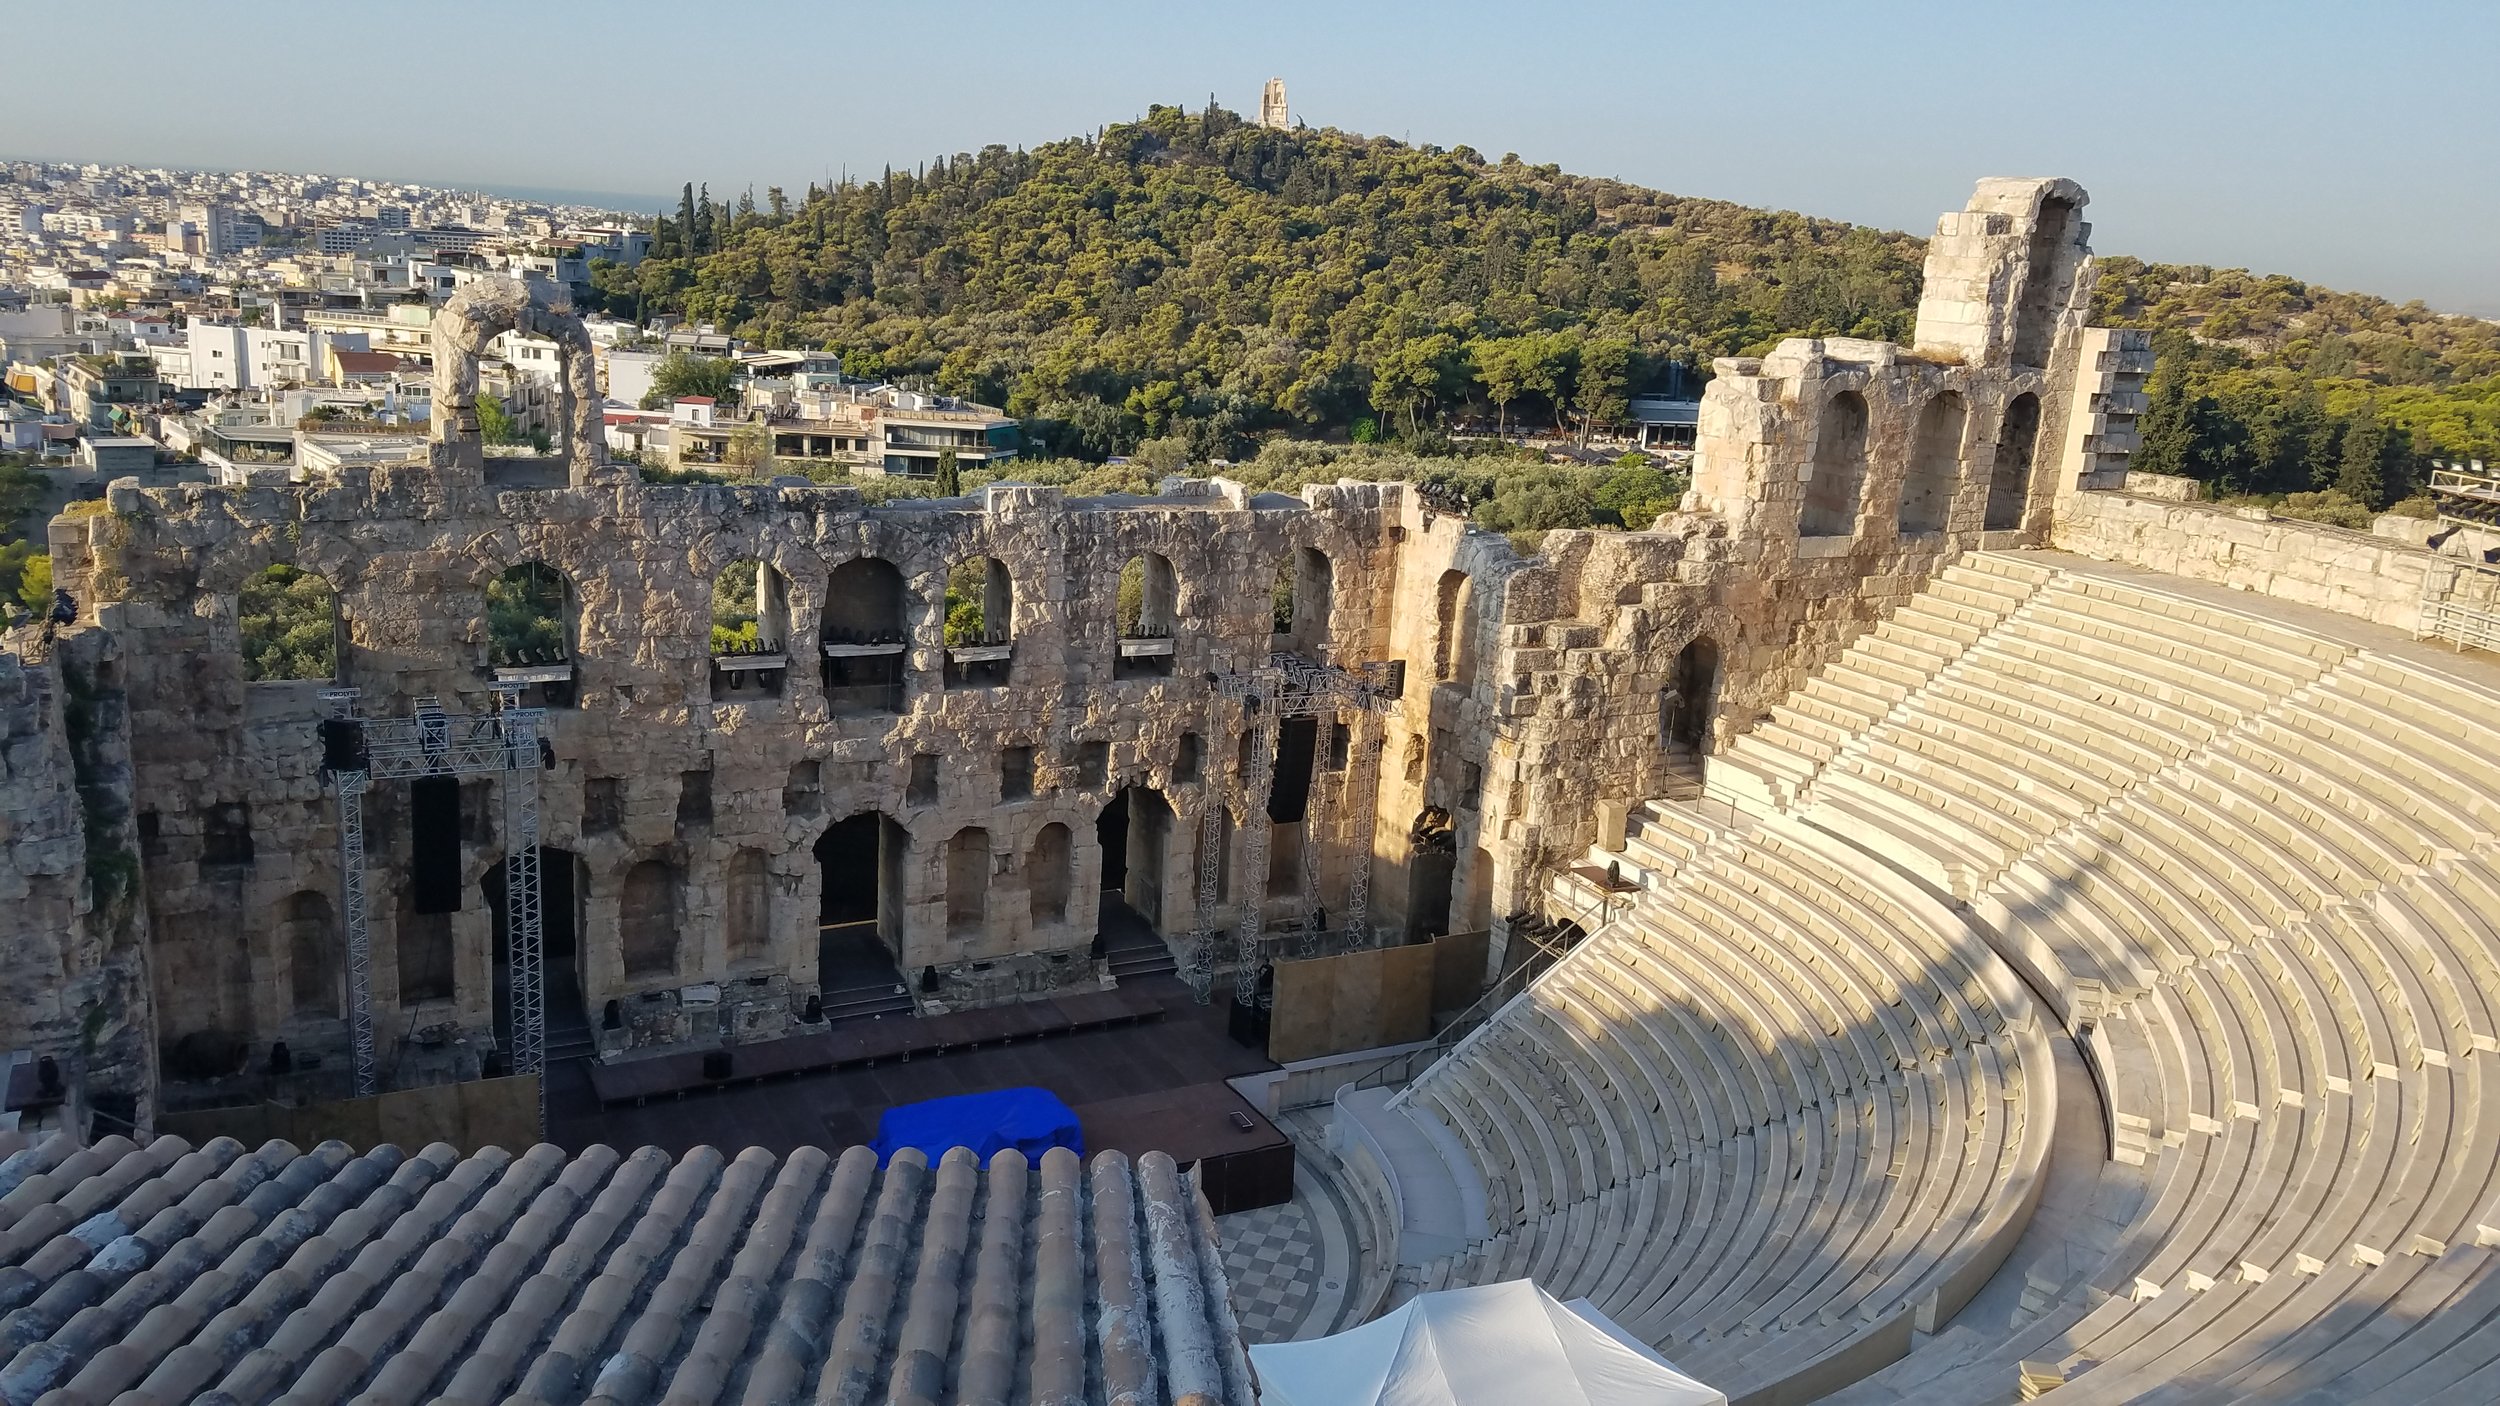  Odeon of Herodes Atticus theater 